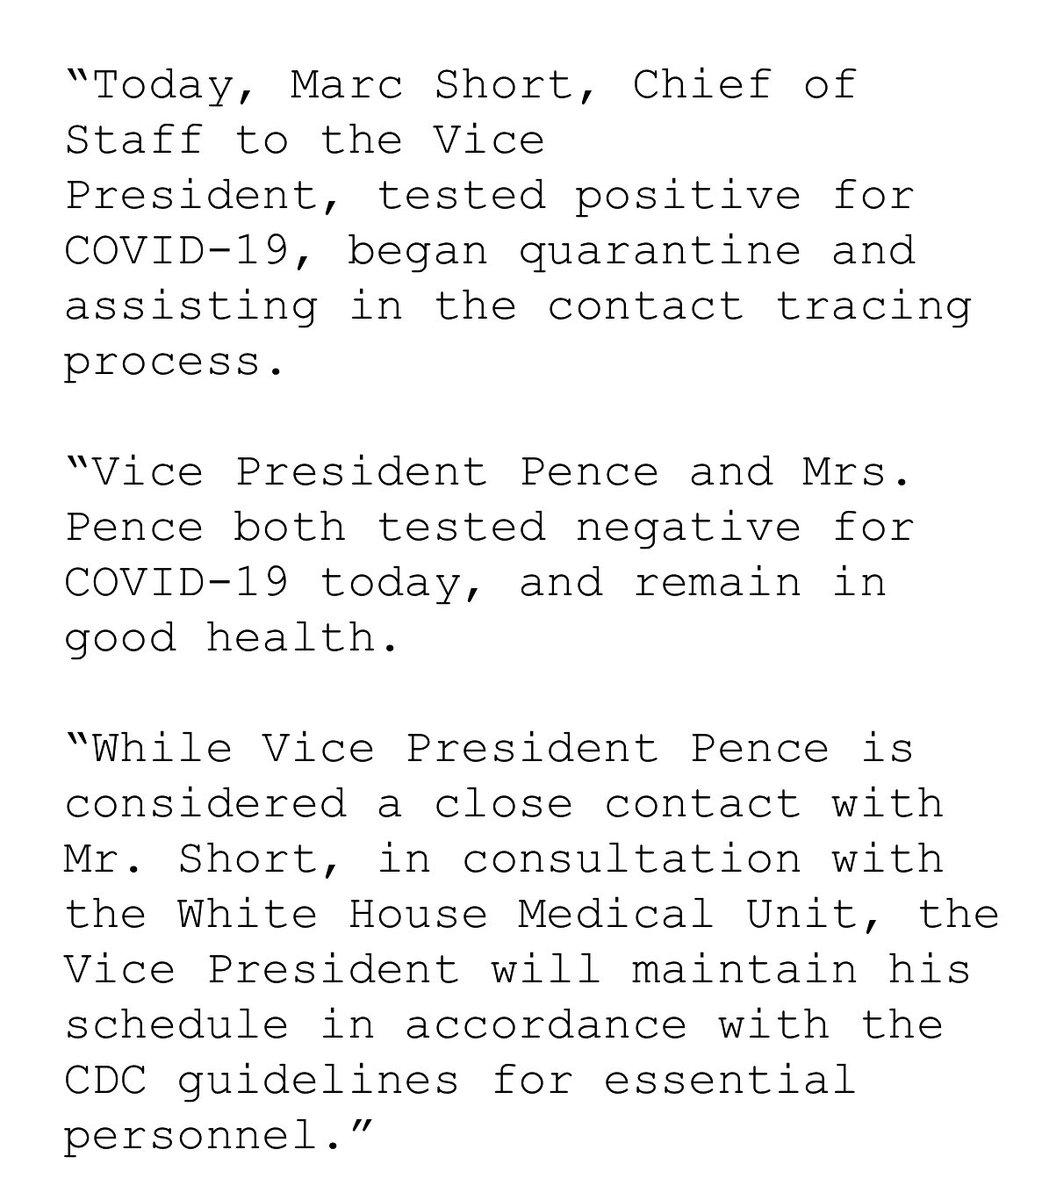 VP Pence “is considered a close contact with Mr. Short”, according to his press secretary. But Pence—the head of the Coronavirus task force—will not quarantine for 14 days. Instead he will “maintain his schedule.”